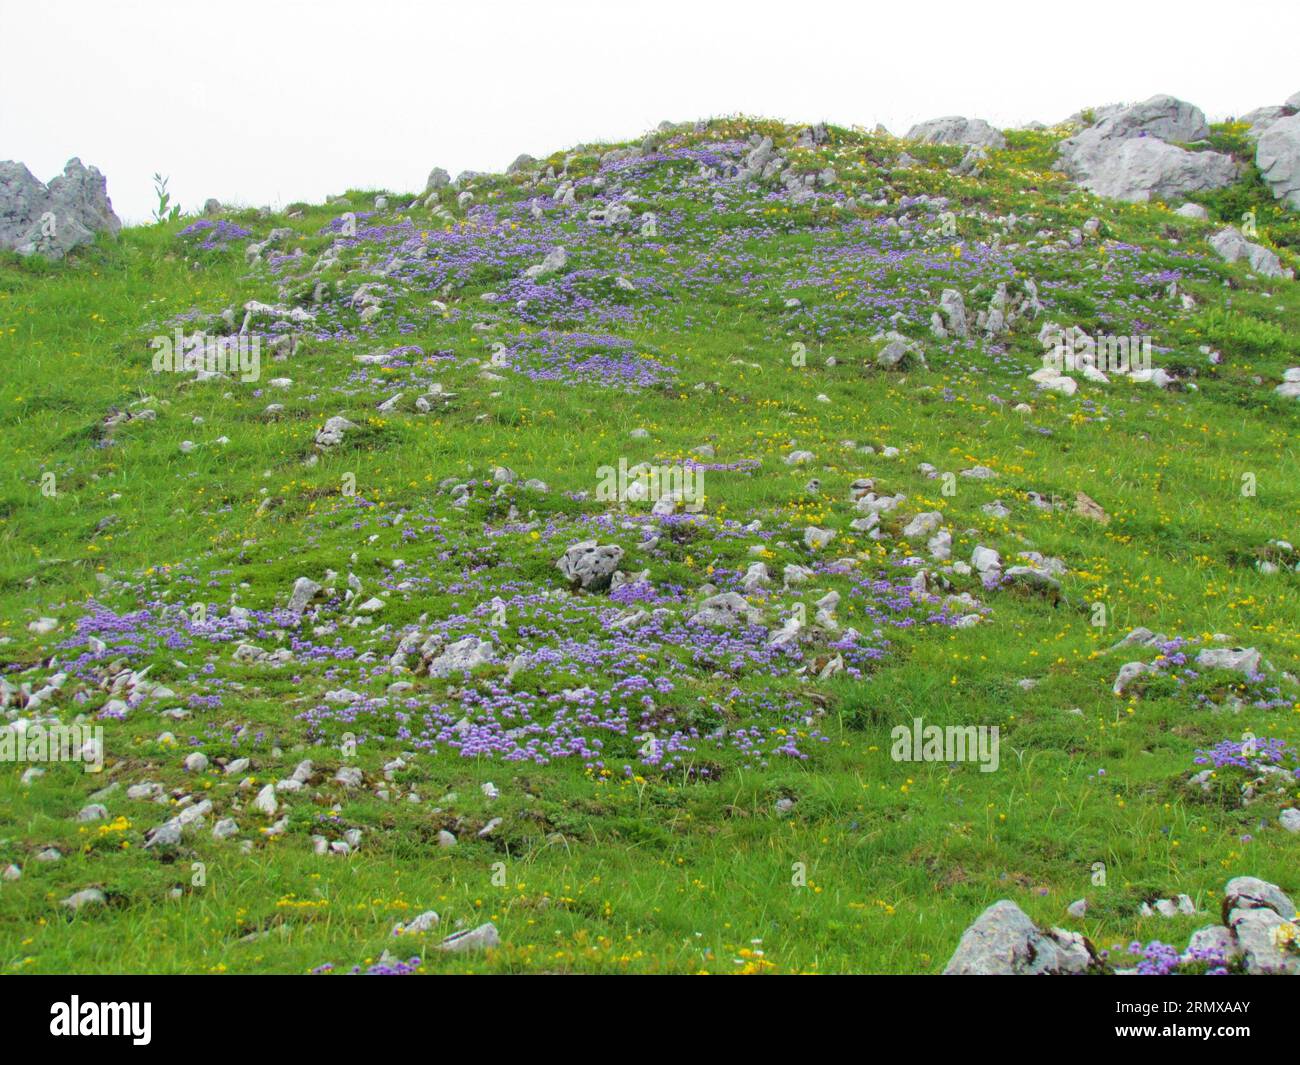 Large patch of Globularia nudicaulis growing on a grassy mountain slope covered with rocks in Slovenia Stock Photo